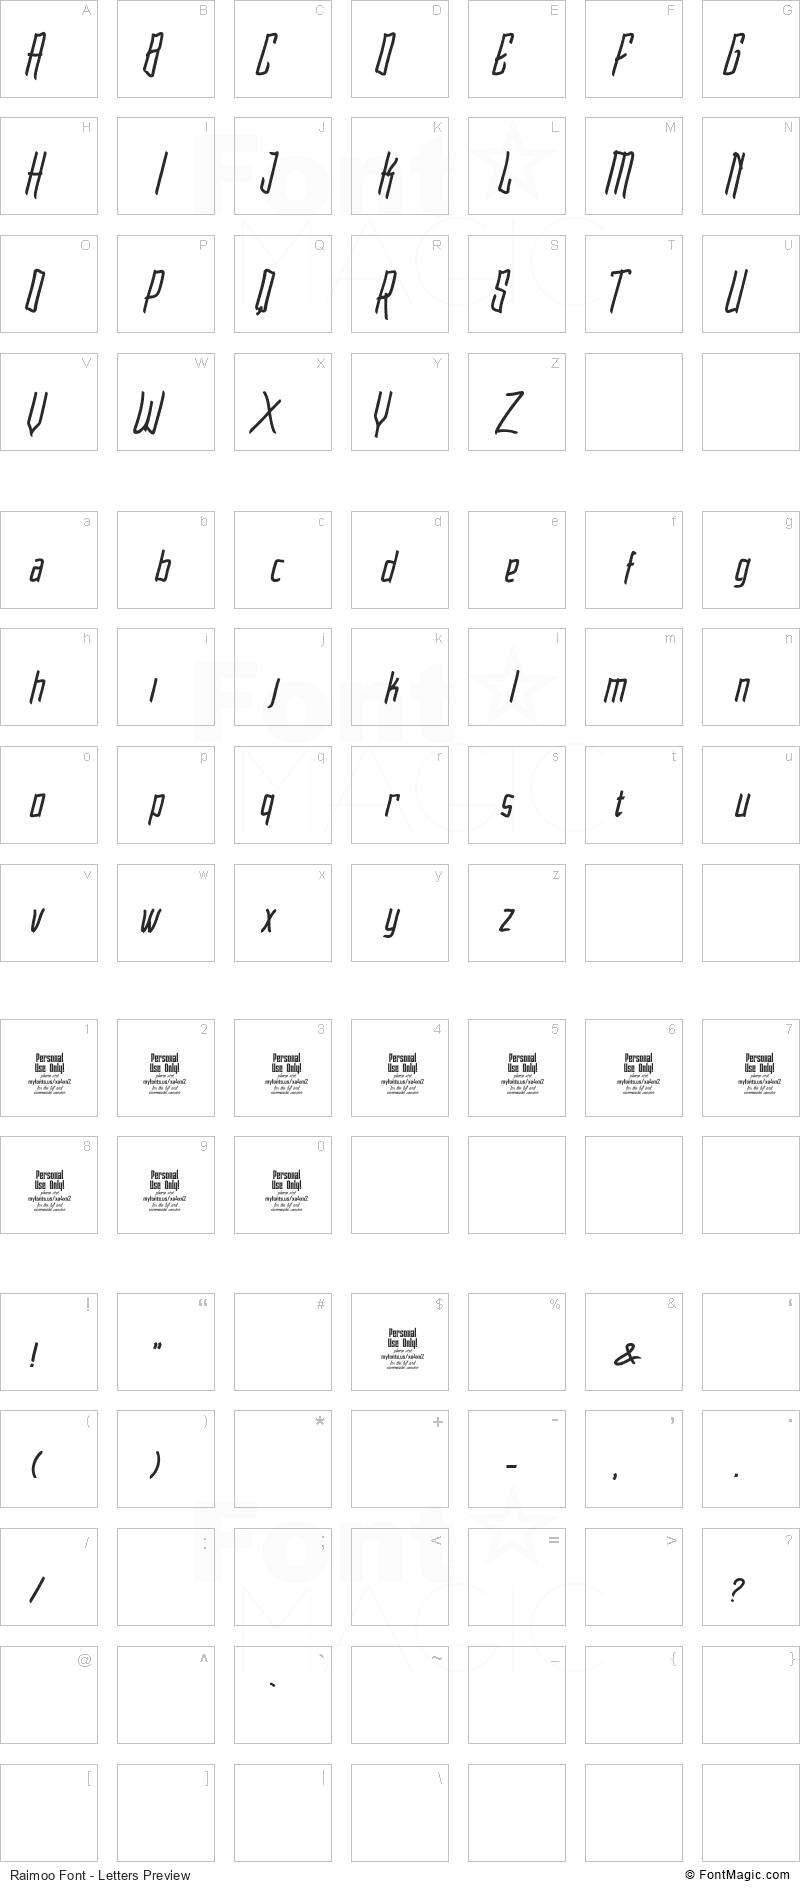 Raimoo Font - All Latters Preview Chart